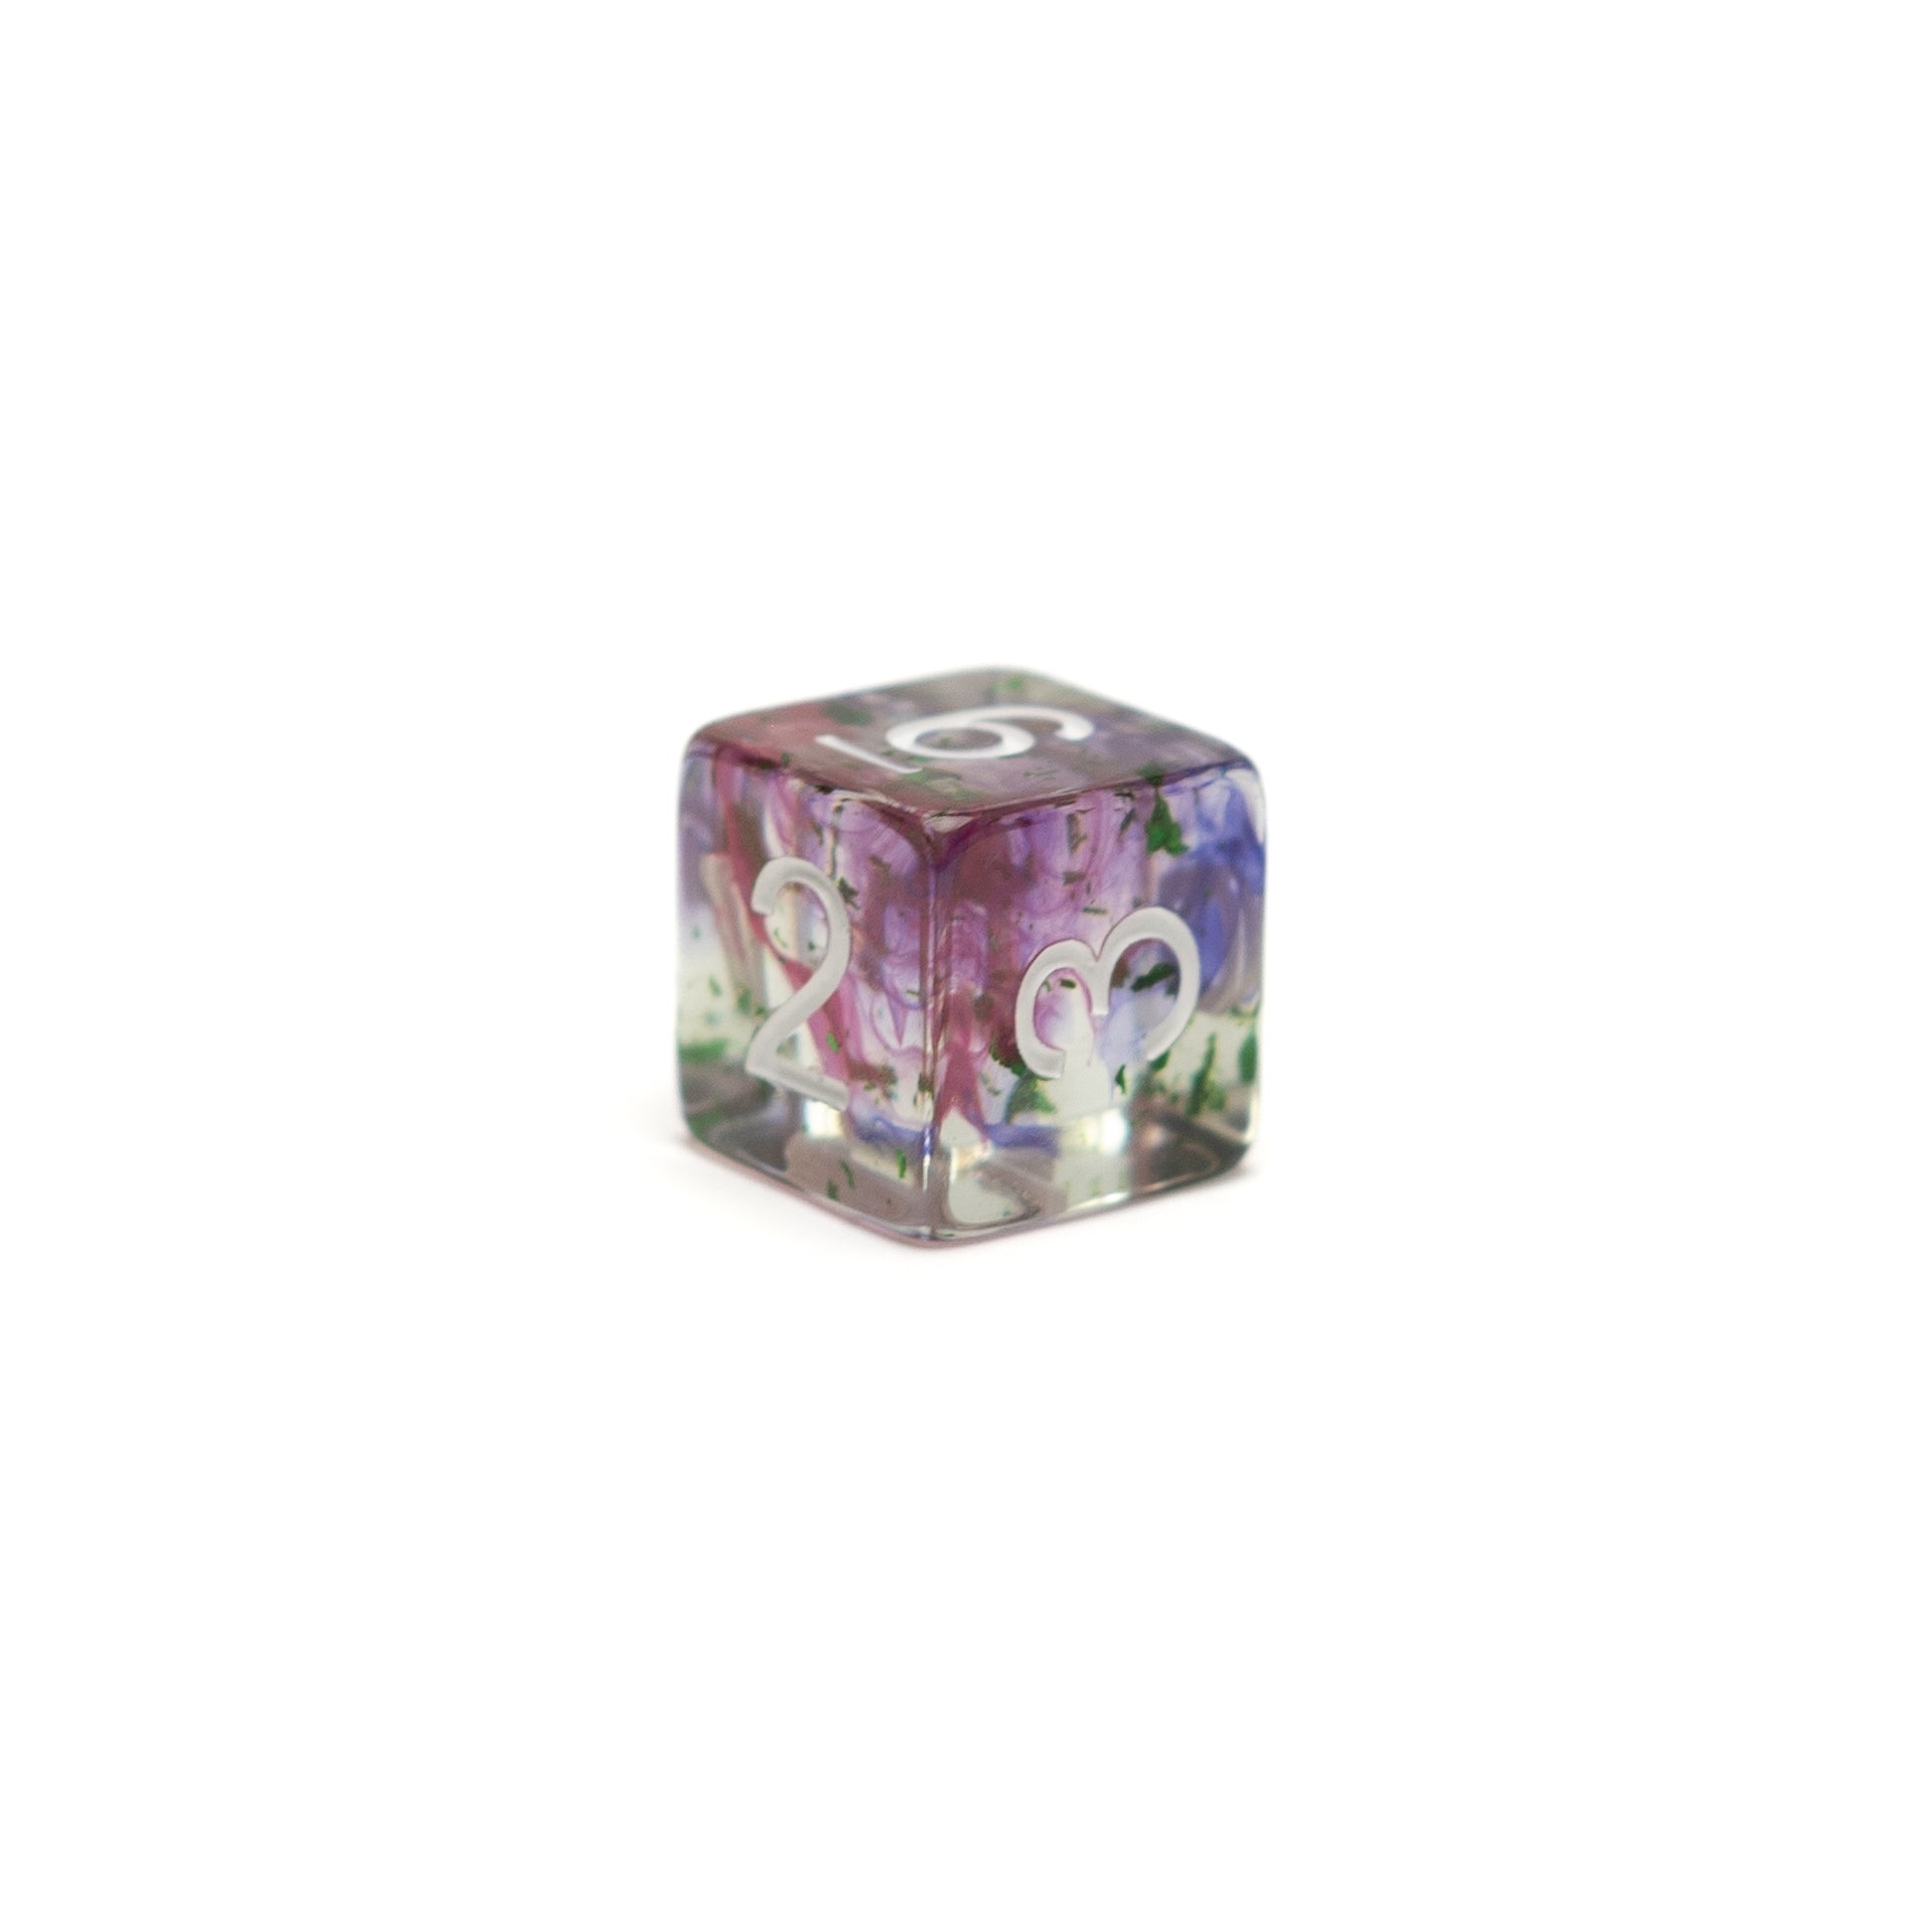 Roll Britannia Malrus and Milo Tosscobble Dungeons and Dragons D6 Dice with Swirling Purple and Green Glitter Aesthetic